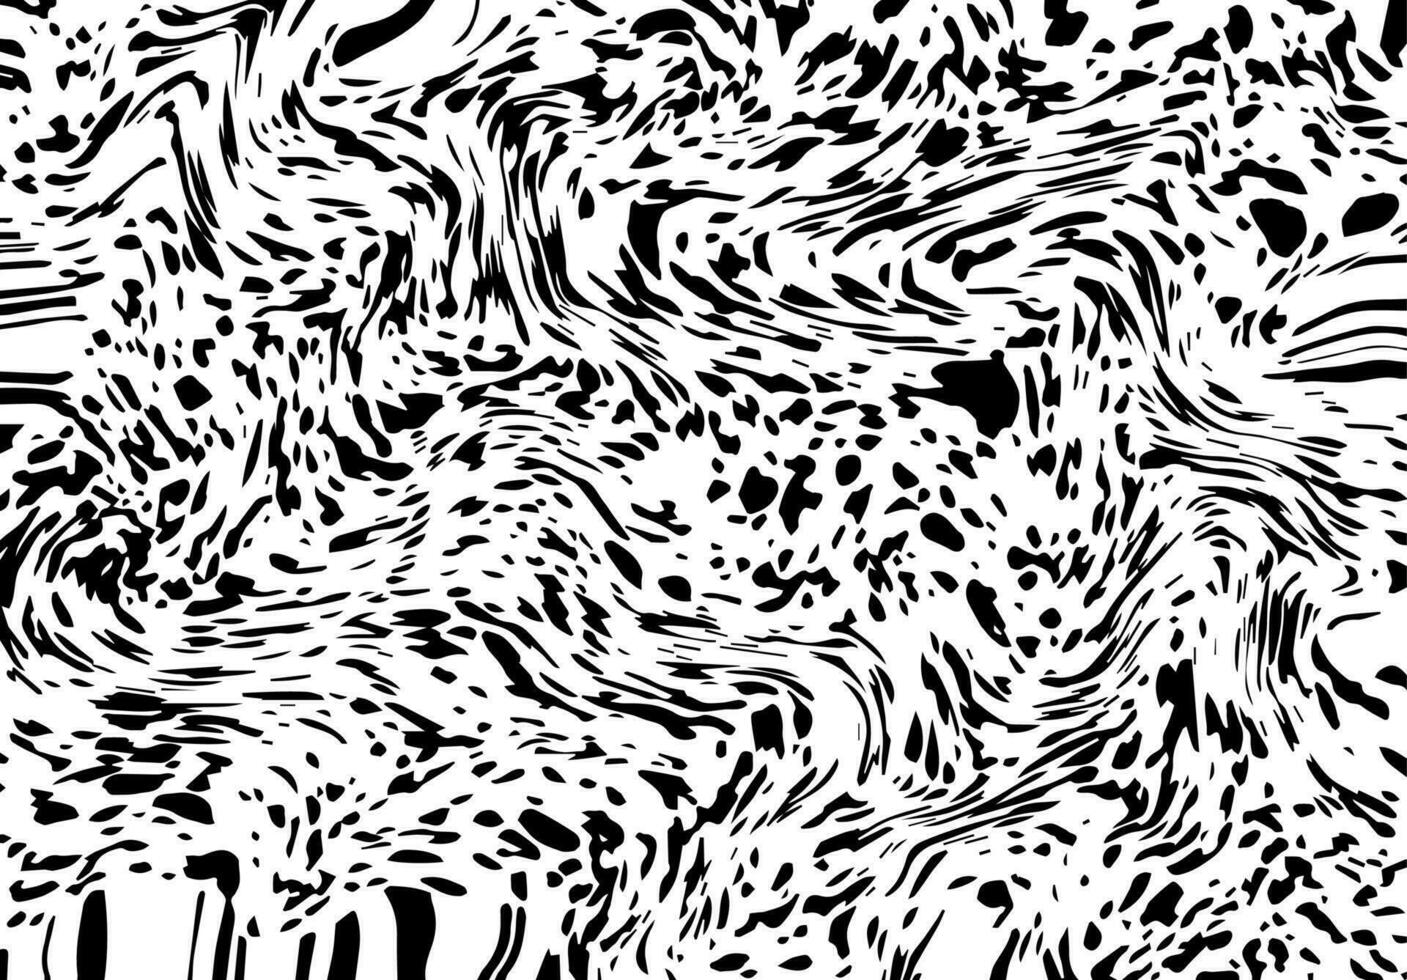 Grunge black and white background template. abstract,messy, splattered,sprayer texture with easy modification vector. vector